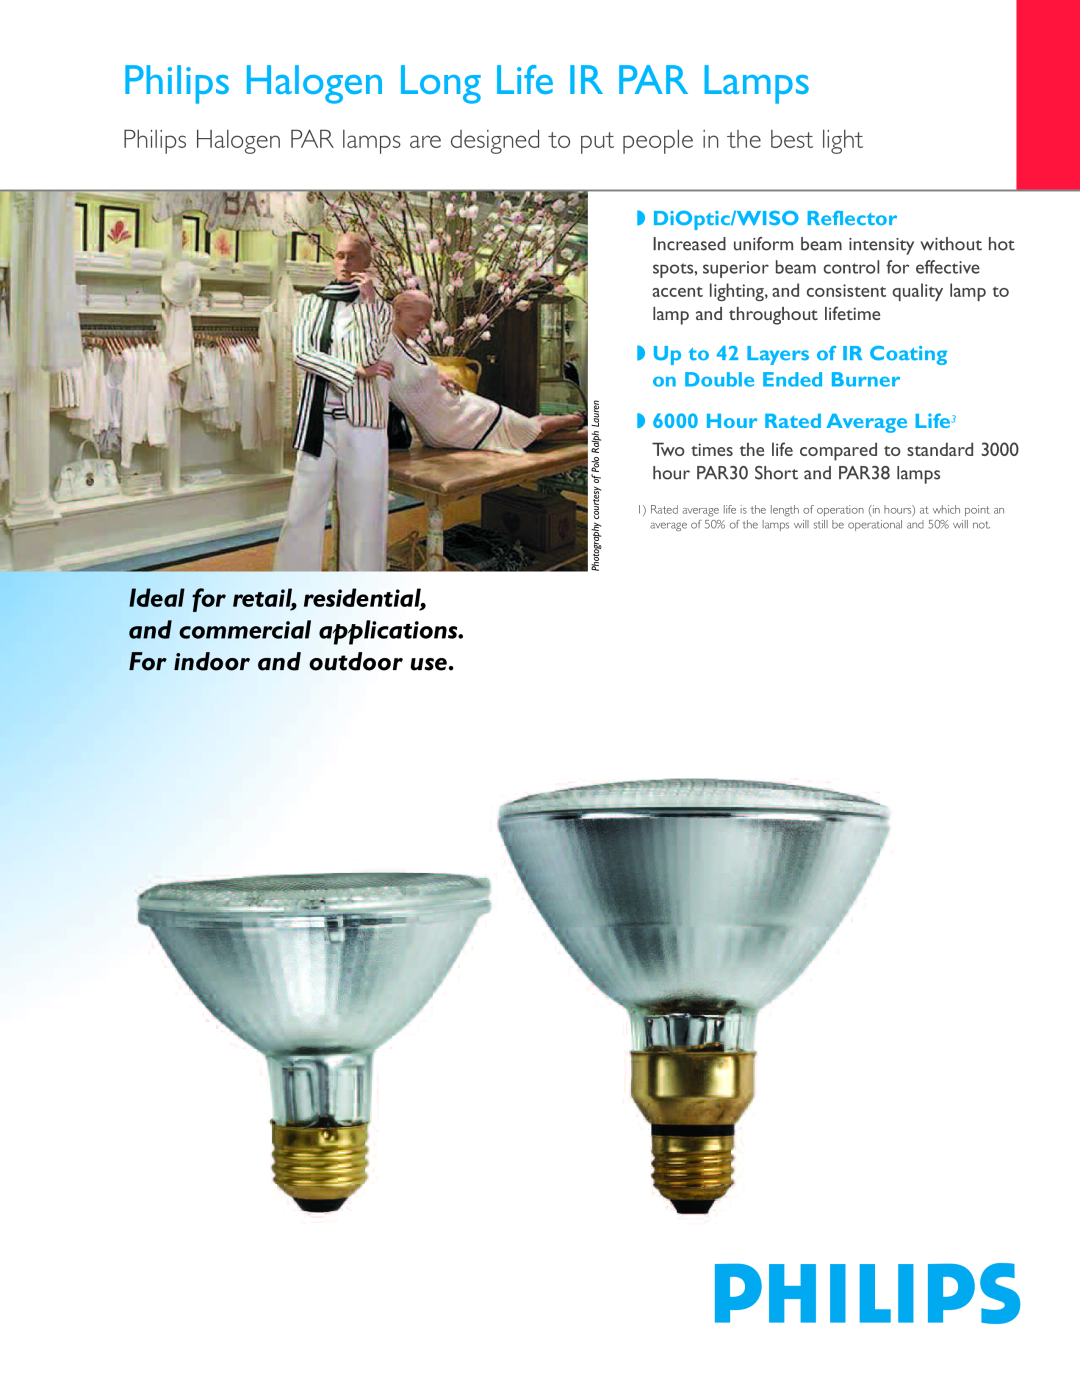 Philips P-5760-A manual Philips Halogen Long Life IR PAR Lamps, DiOptic/WISO Reflector, Hour Rated Average Life3 